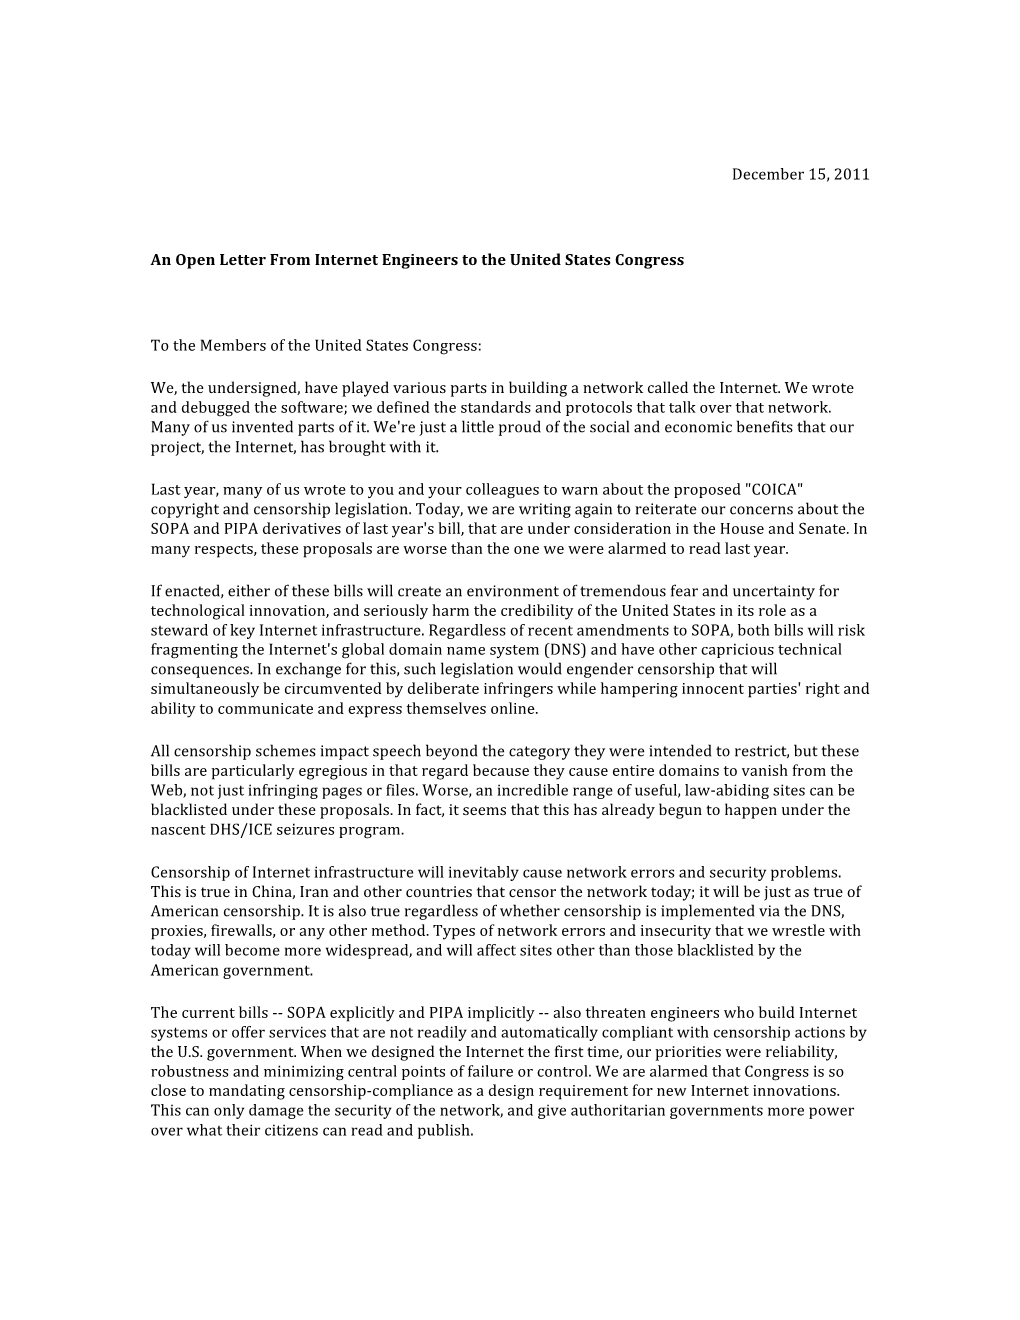 December 15, 2011 an Open Letter from Internet Engineers to The